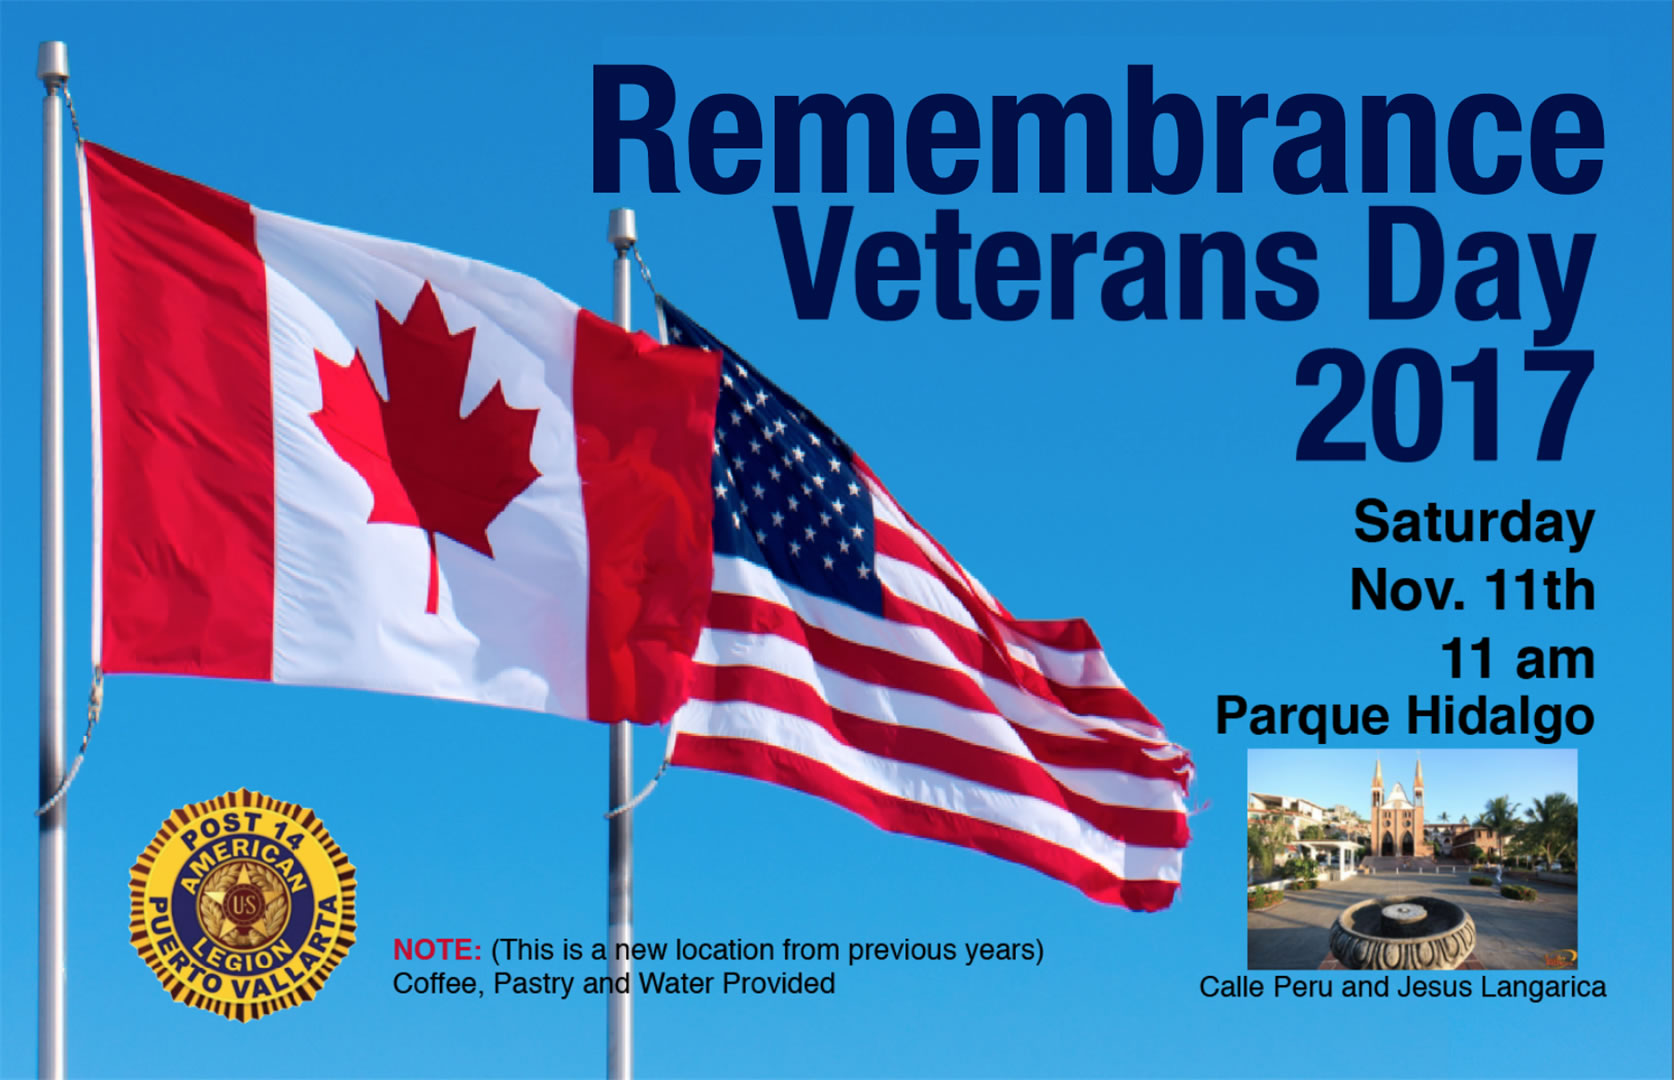 This Saturday, November 11th Remembrance Day & Veterans Day Ceremony at Parque Hidalgo. Location change this year. At the north end of the Malecon. Stop by if you can. Coffee, pastries and water provided.